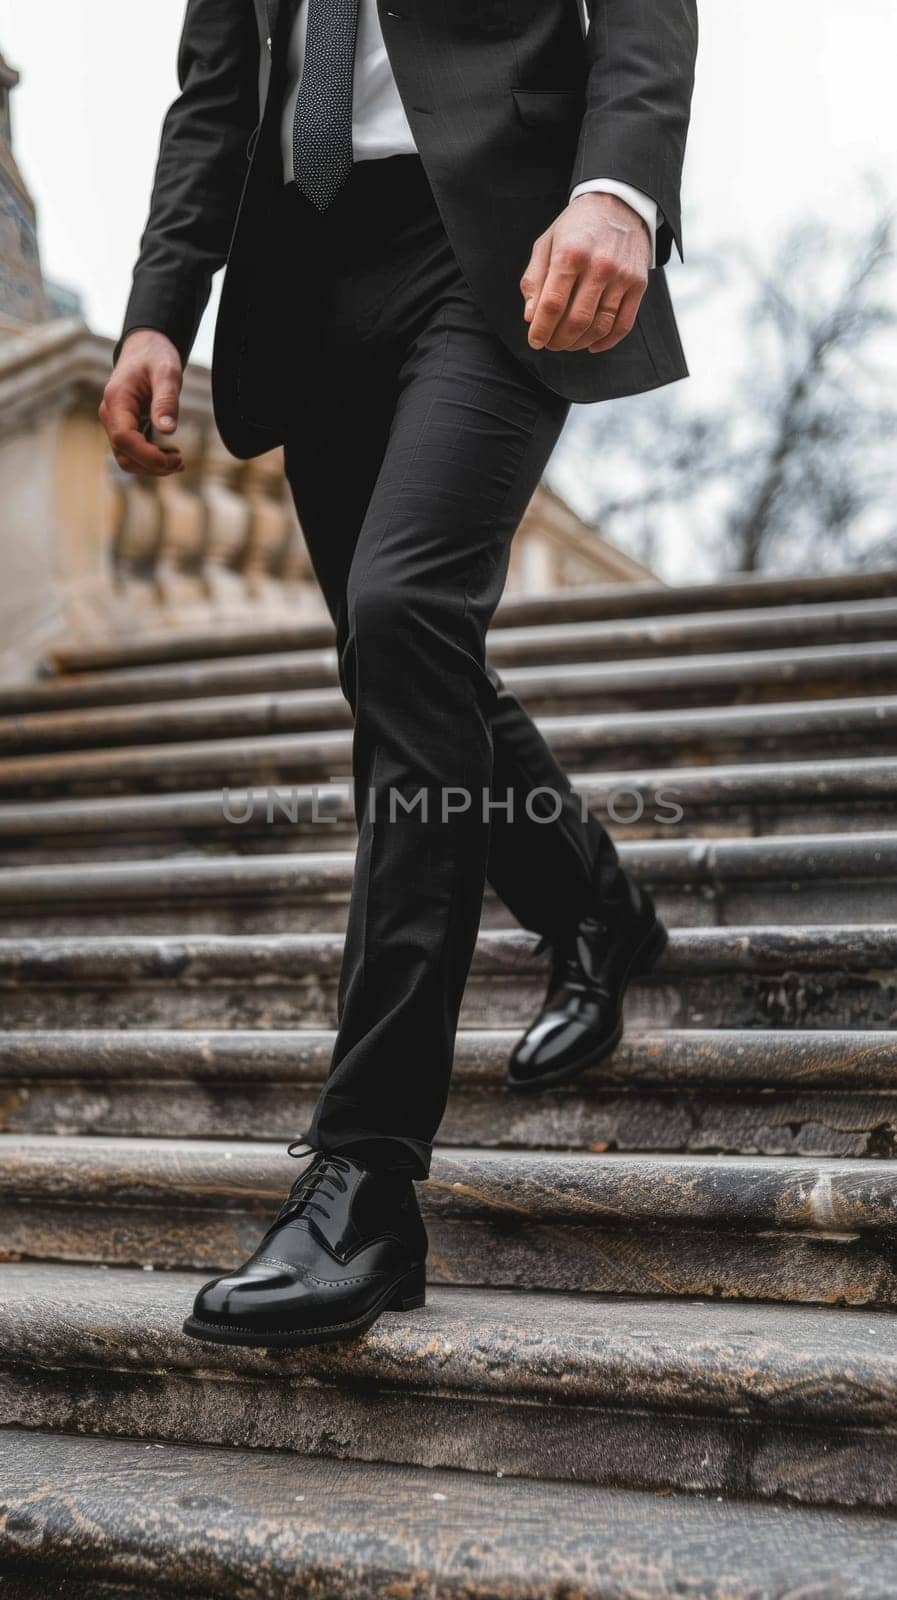 A businessmans foot in a sleek black shoe stepping up marble steps, symbolic of a corporate ascent. by sfinks